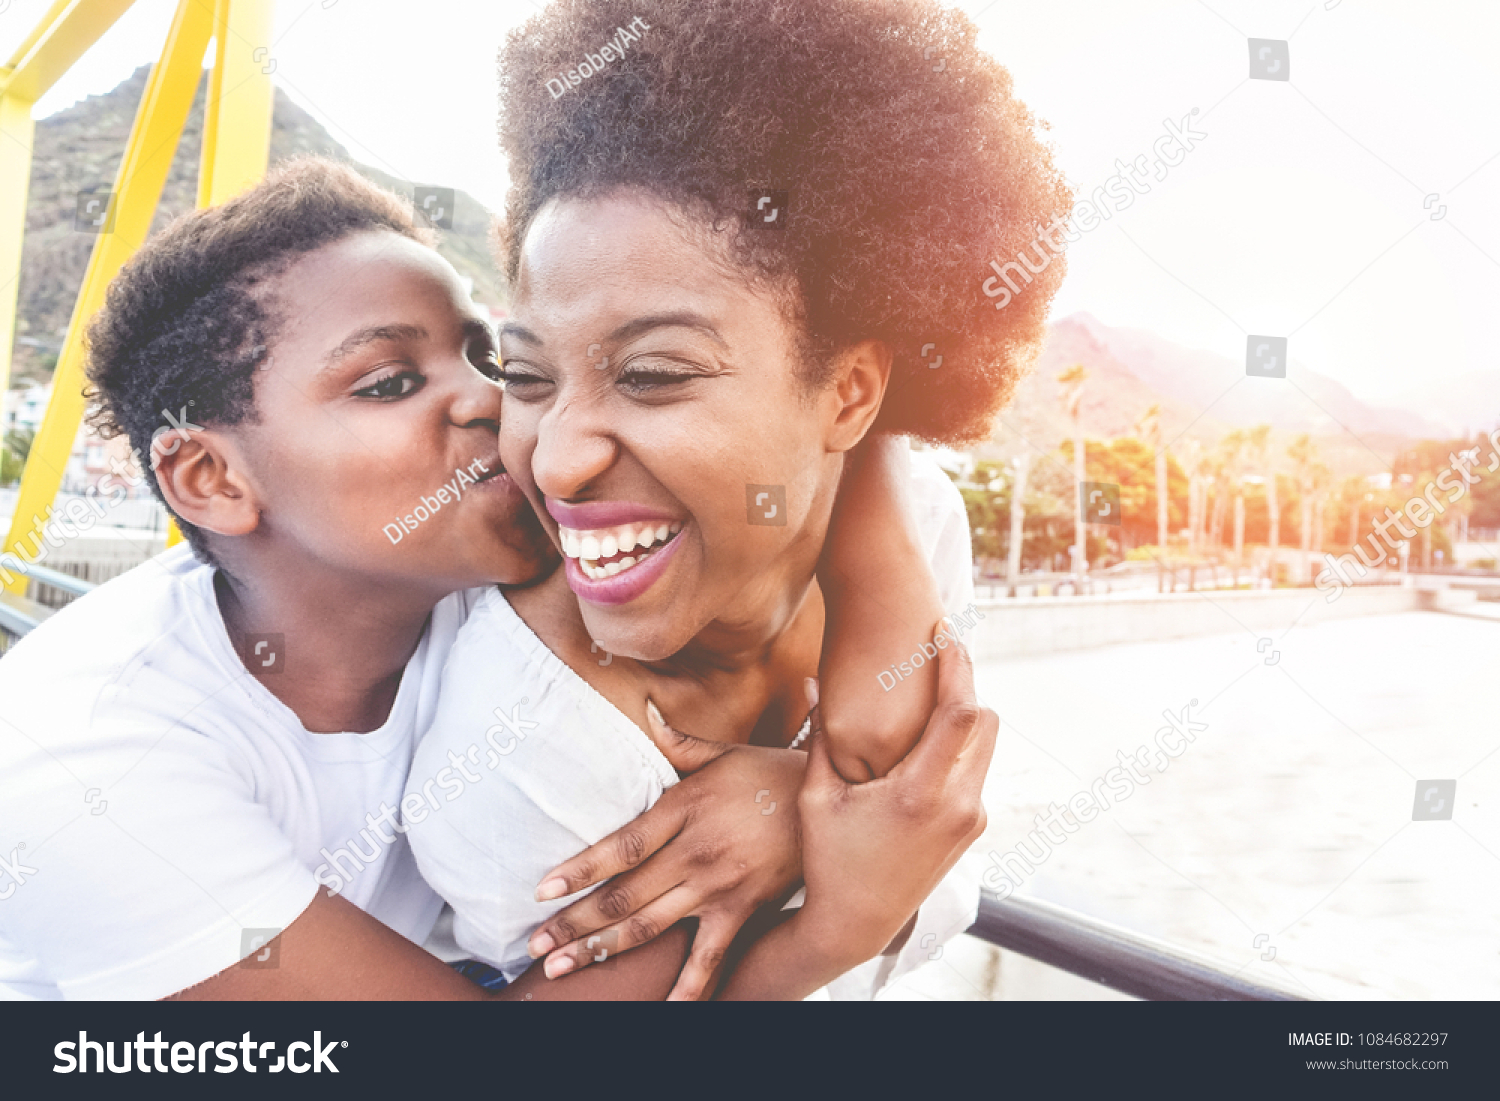 Happy young mother having fun with her child in summer sunny day - Son kissing his mum outdoor with back sun light - Family lifestyle, motherhood, love and tender moments concept - Focus on woman face #1084682297